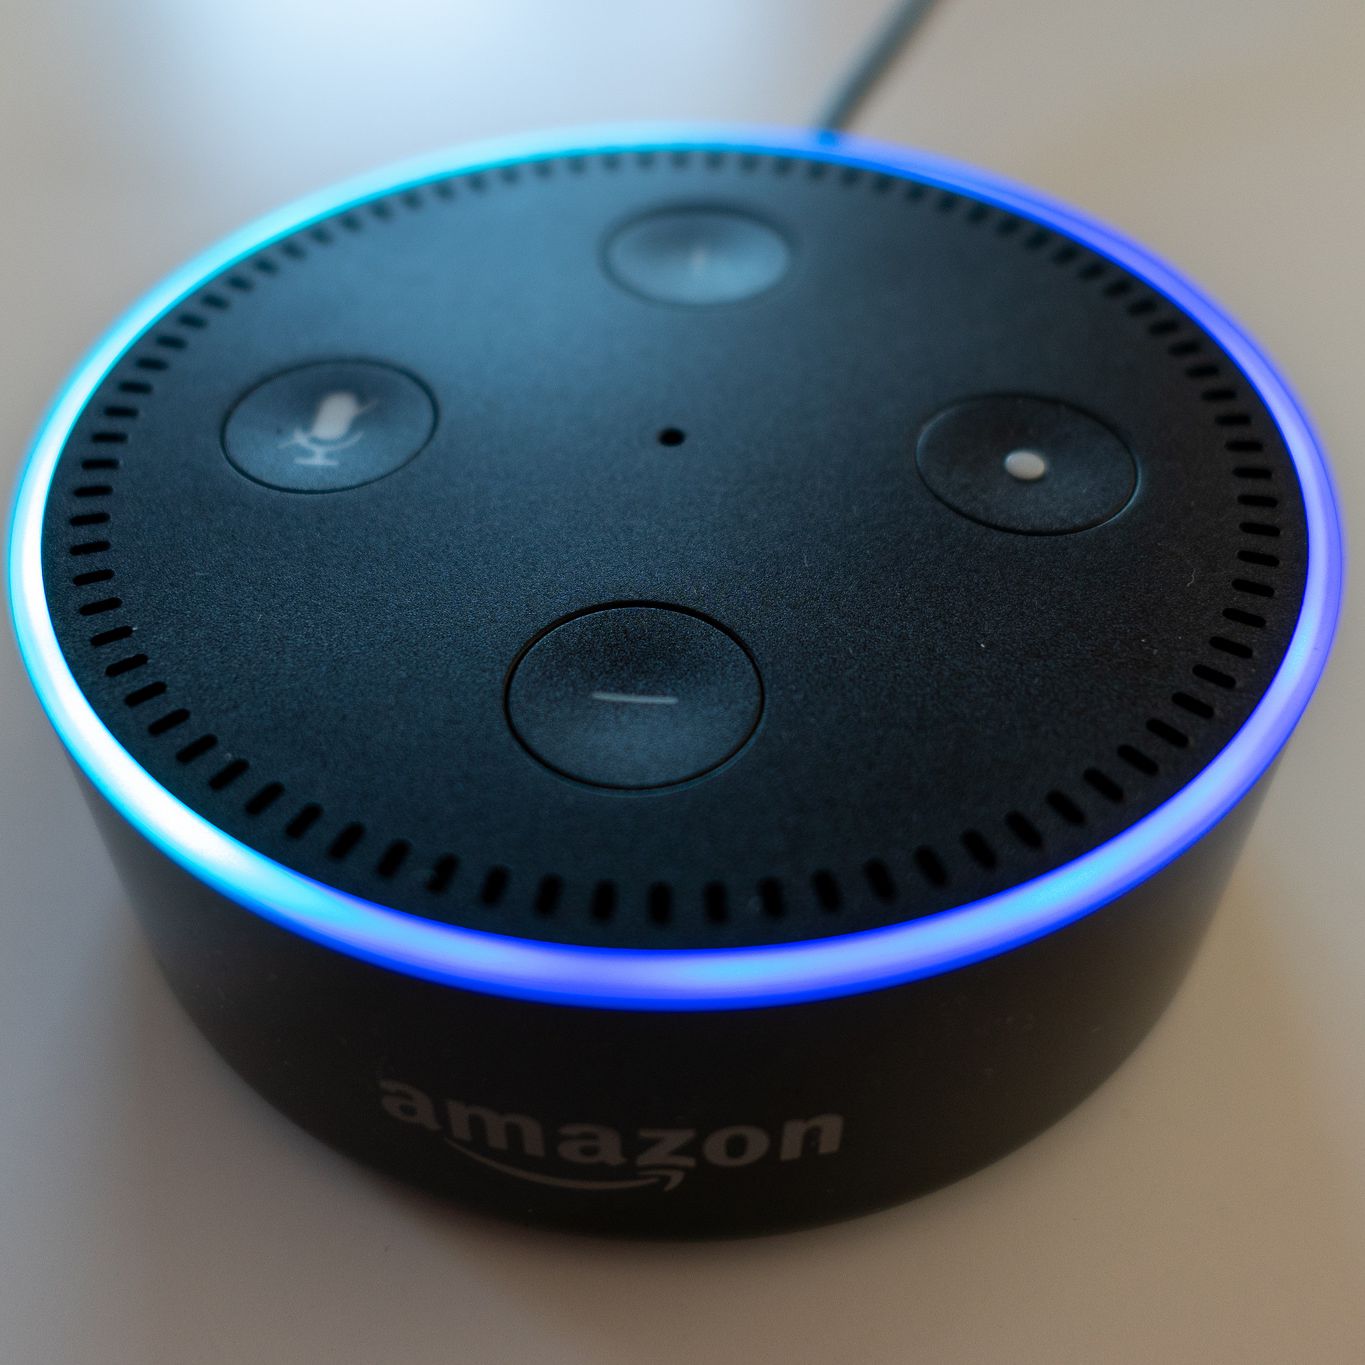 What Does The Blue Light On Alexa Mean